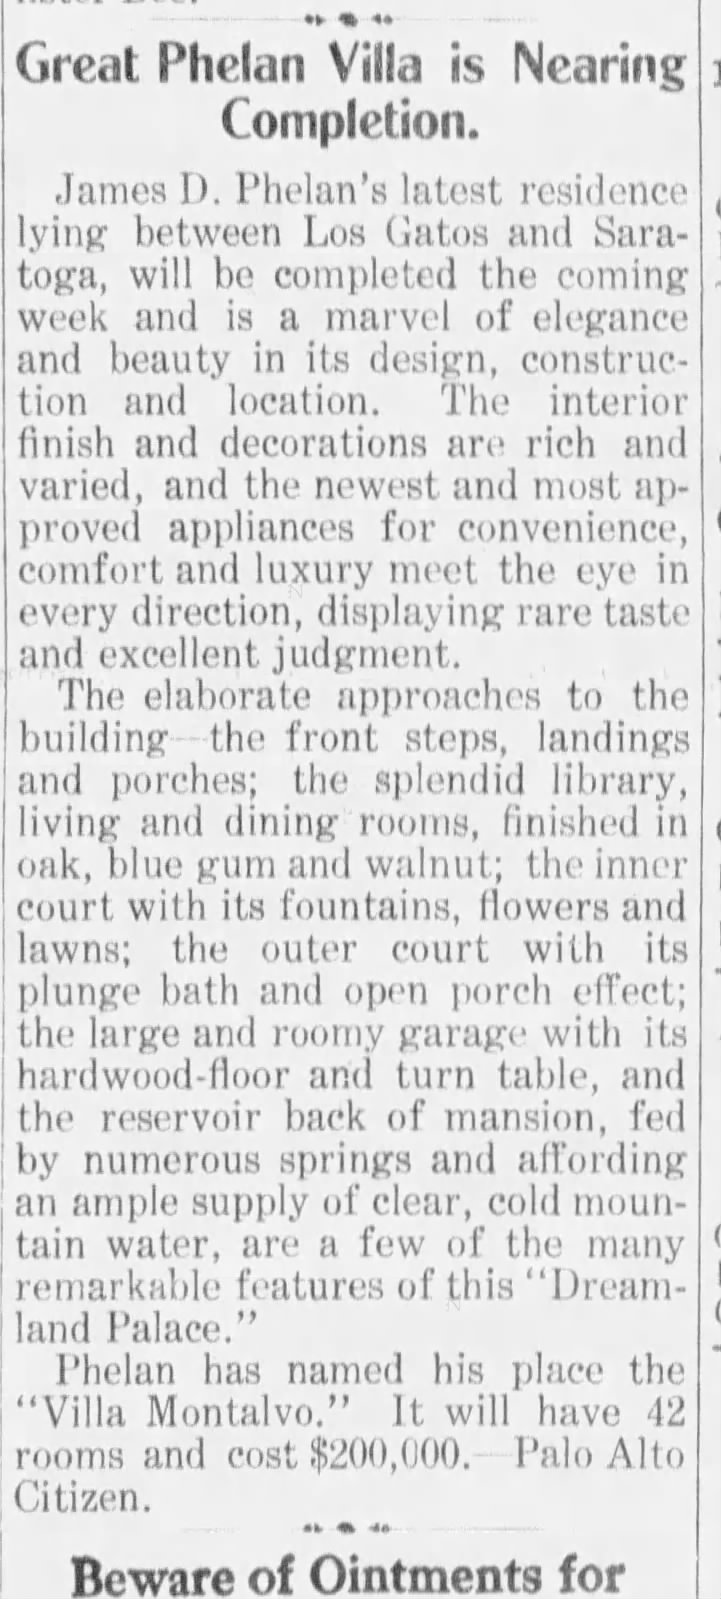 "Great Phelan Villa is Nearing Completion," Los Gatos (California) Mail, March 13, 1913, 5